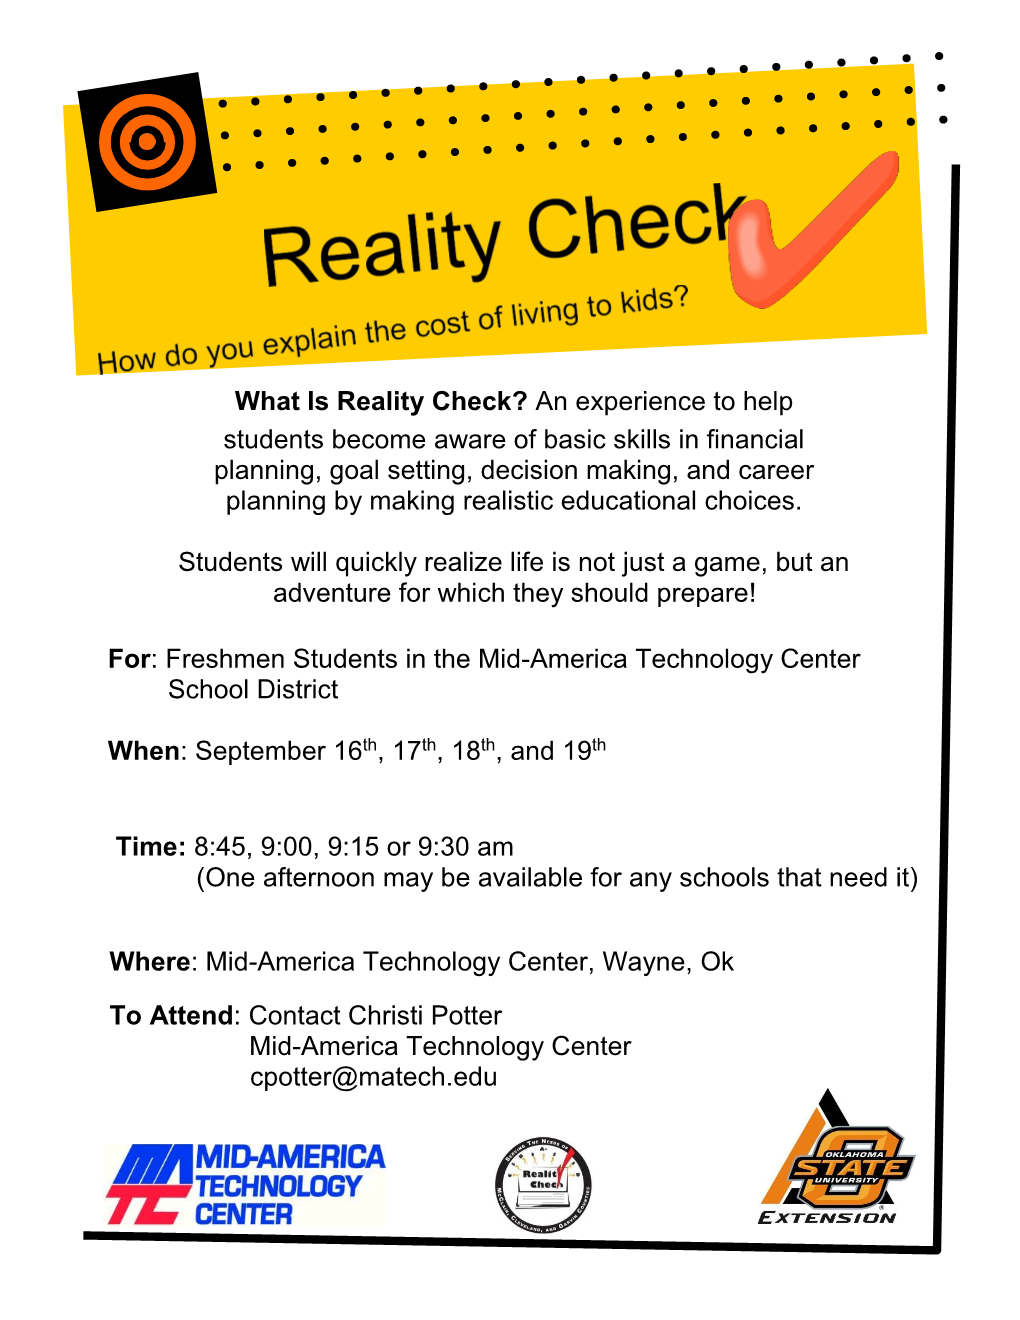 What Is Reality Check? an Experience to Help Students Become Aware of Basic Skills in Financial Planning, Goal Setting, Decisio